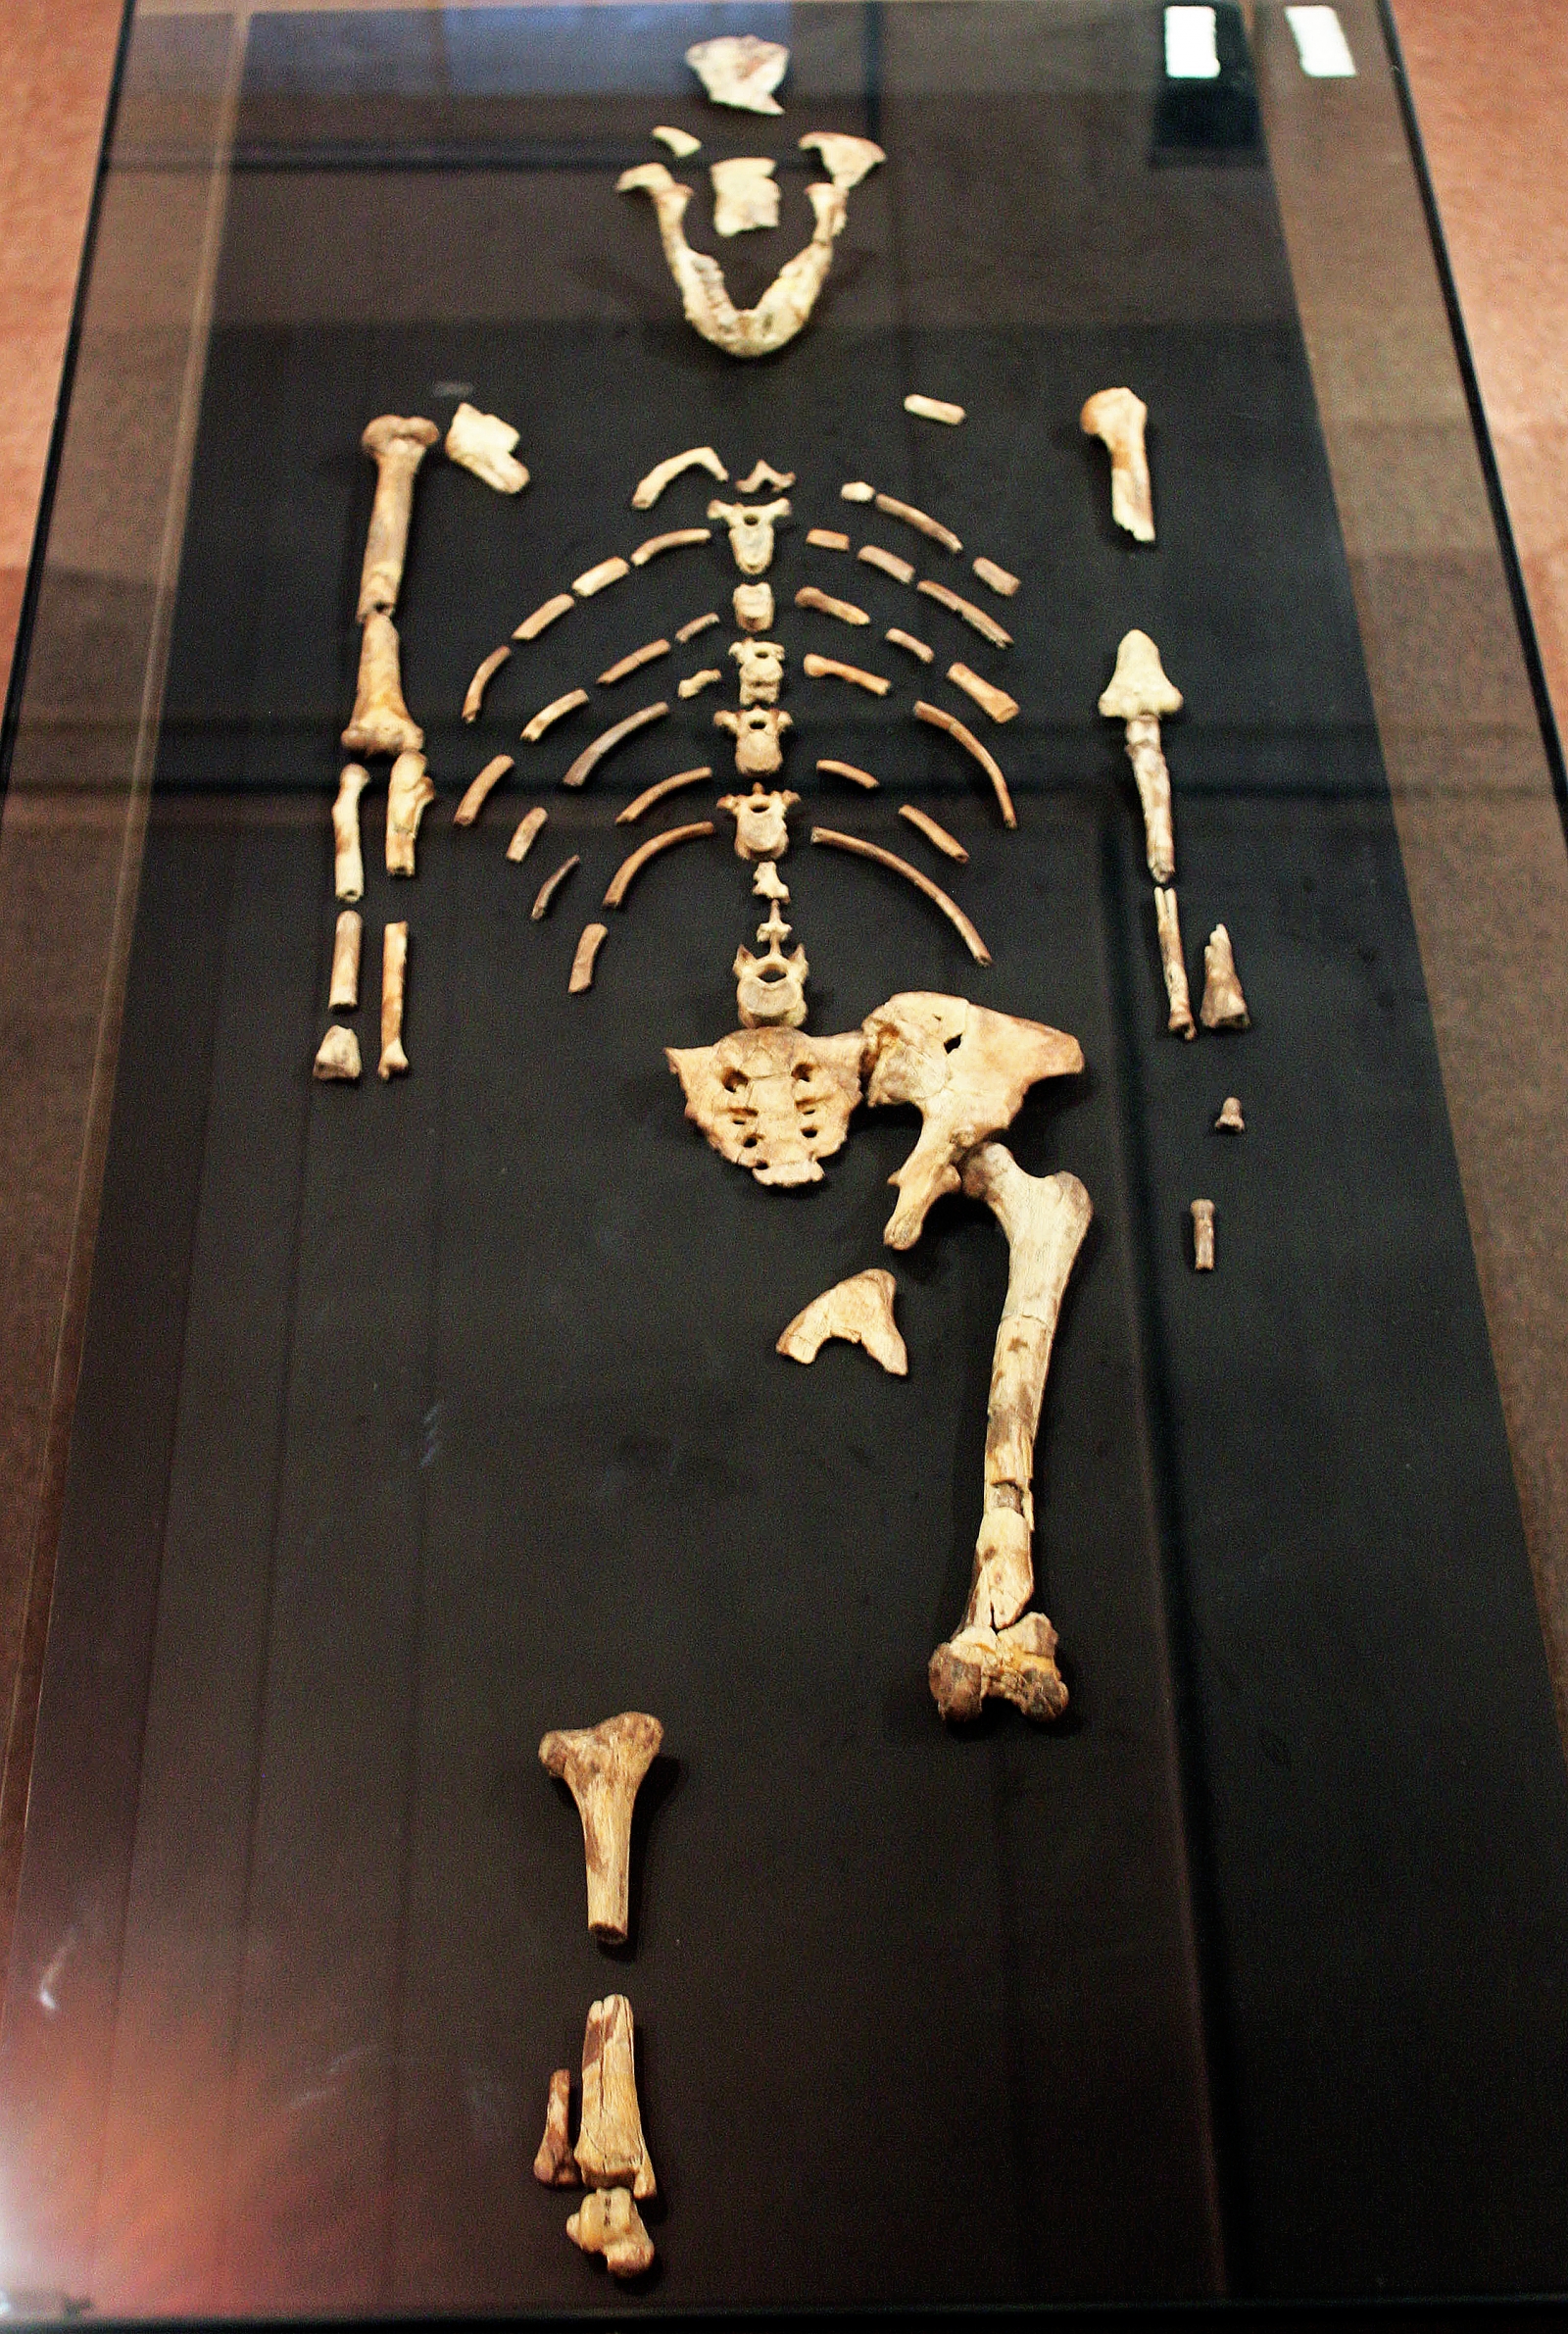 Lucy the Australopithecus, one of our oldest-found human ancestor